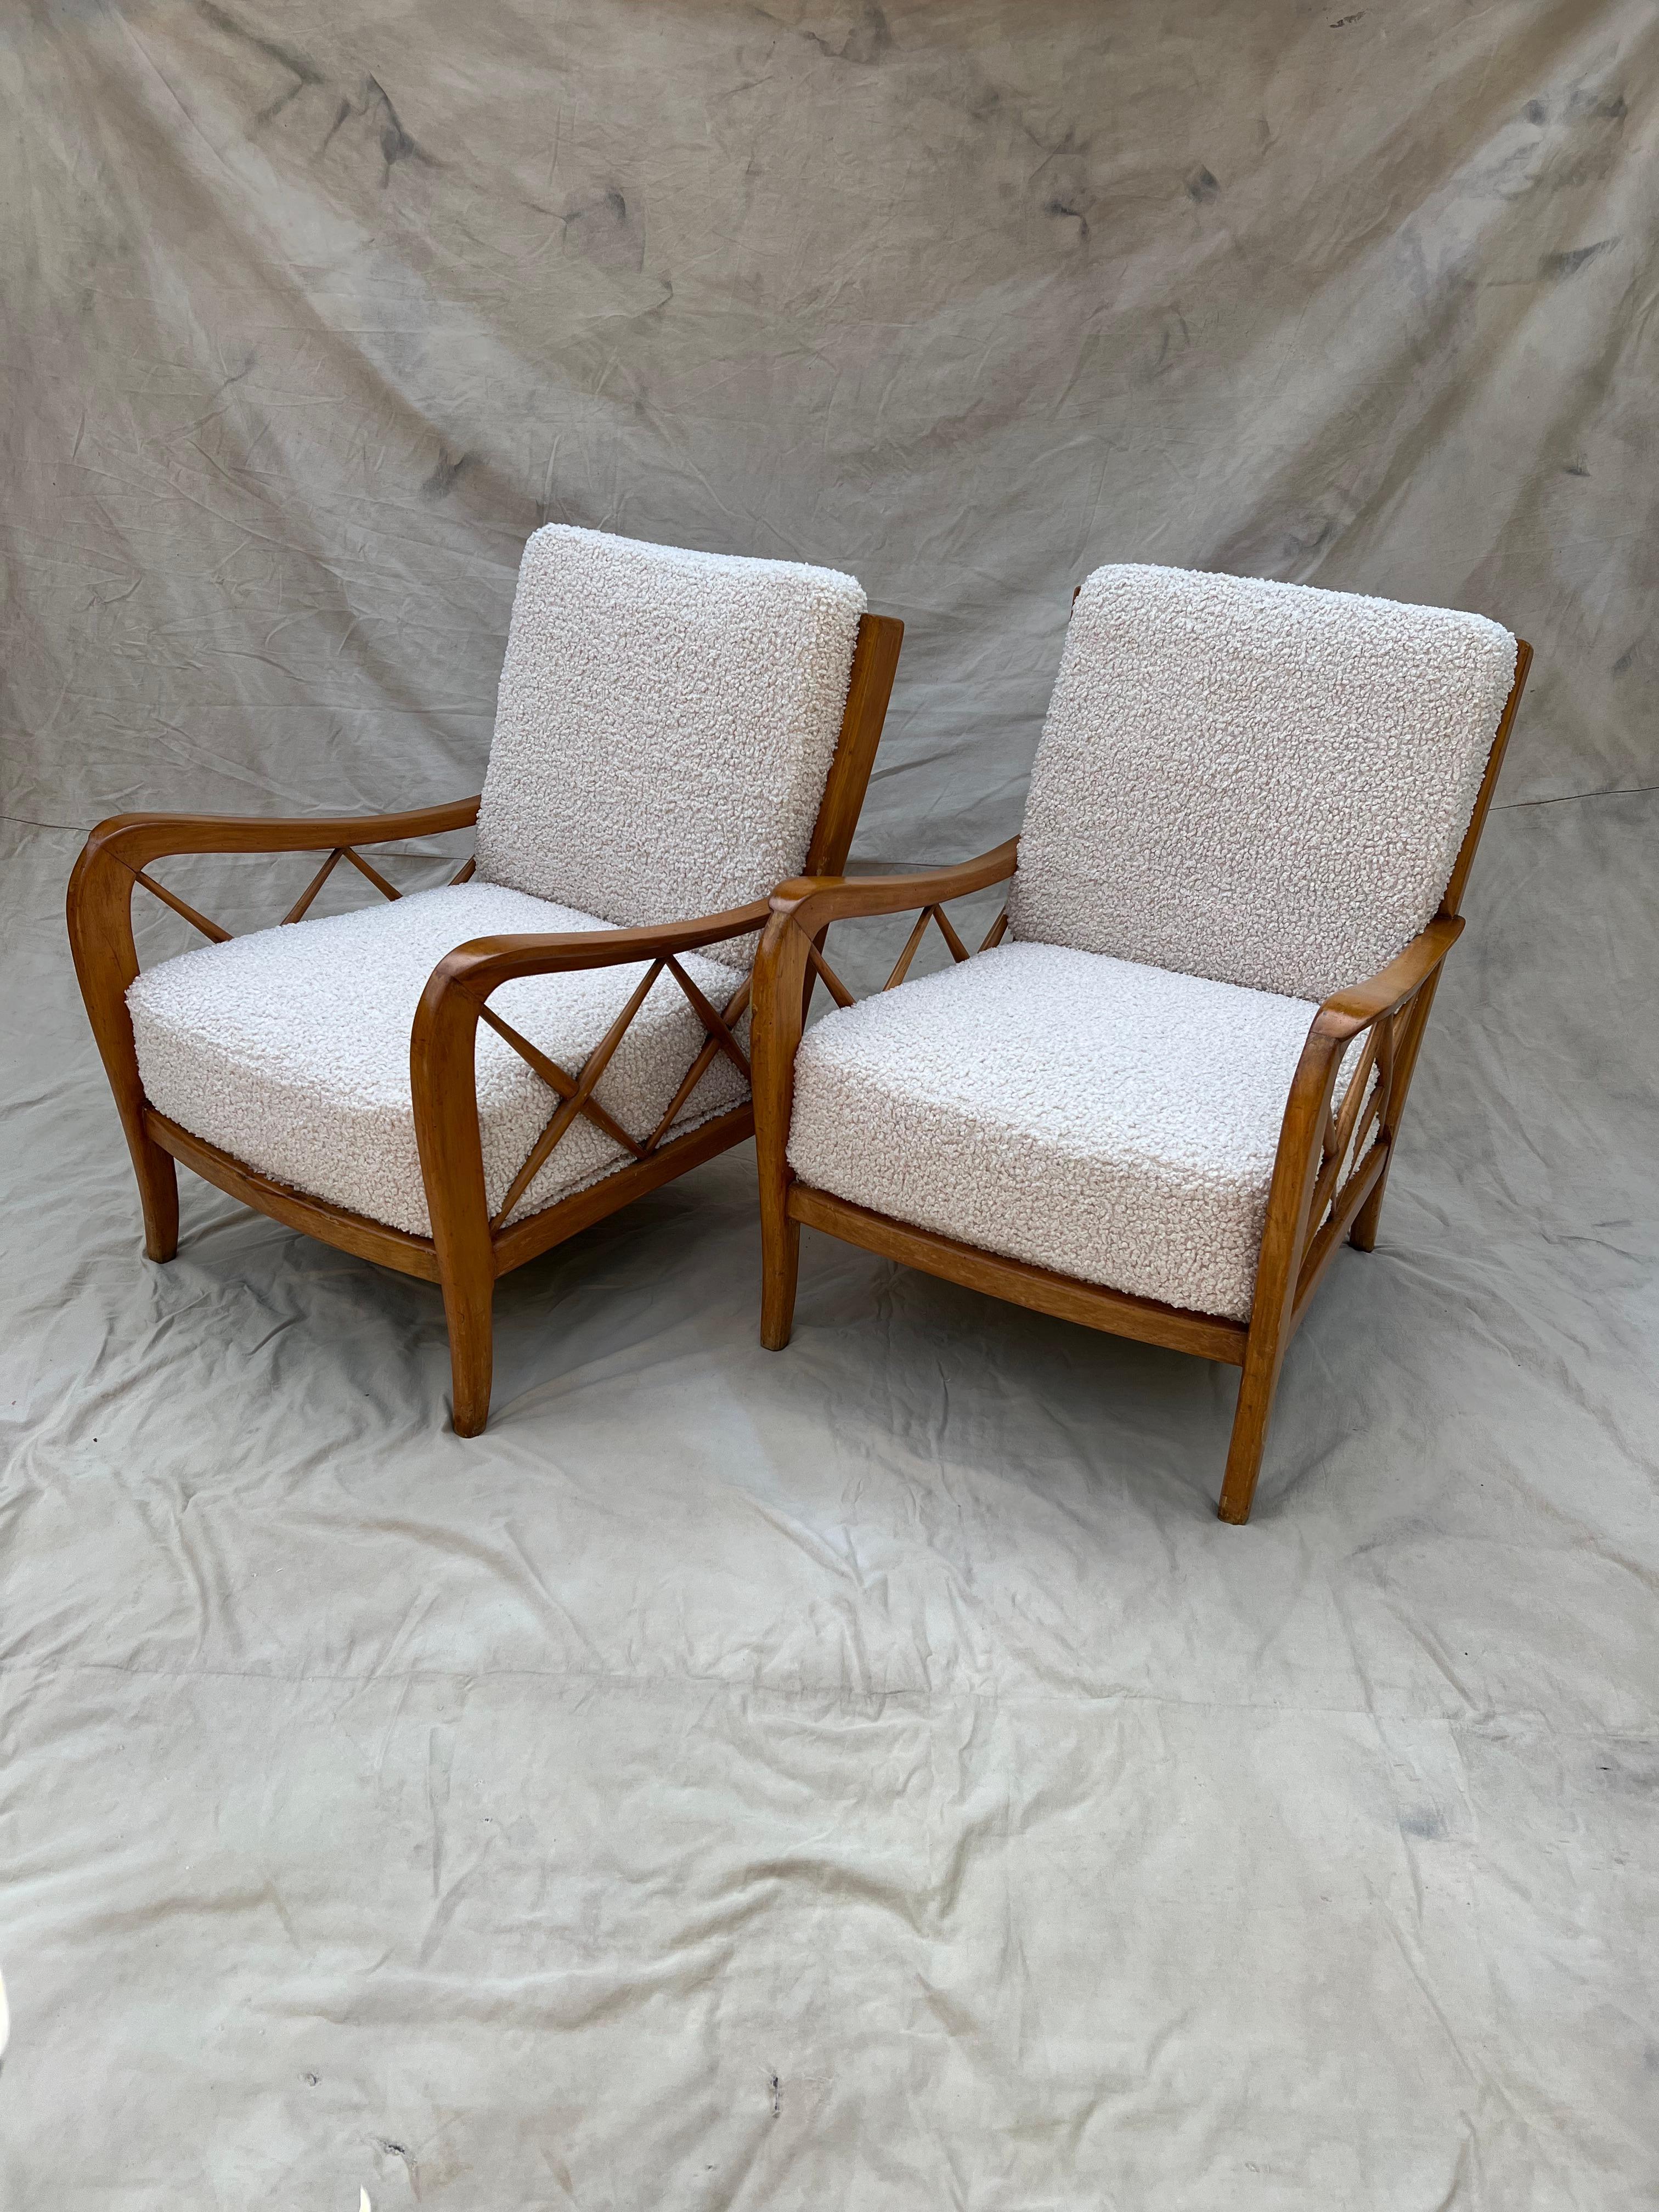 A pair of Italian lounge chairs, by Paolo Buffa and upholstered in Creme Boucle. The pair are exquisitely designed with chic, yet bold detailing - The patinated quality of the wood frame is perfection, the subtle carved wood and the crossed arm